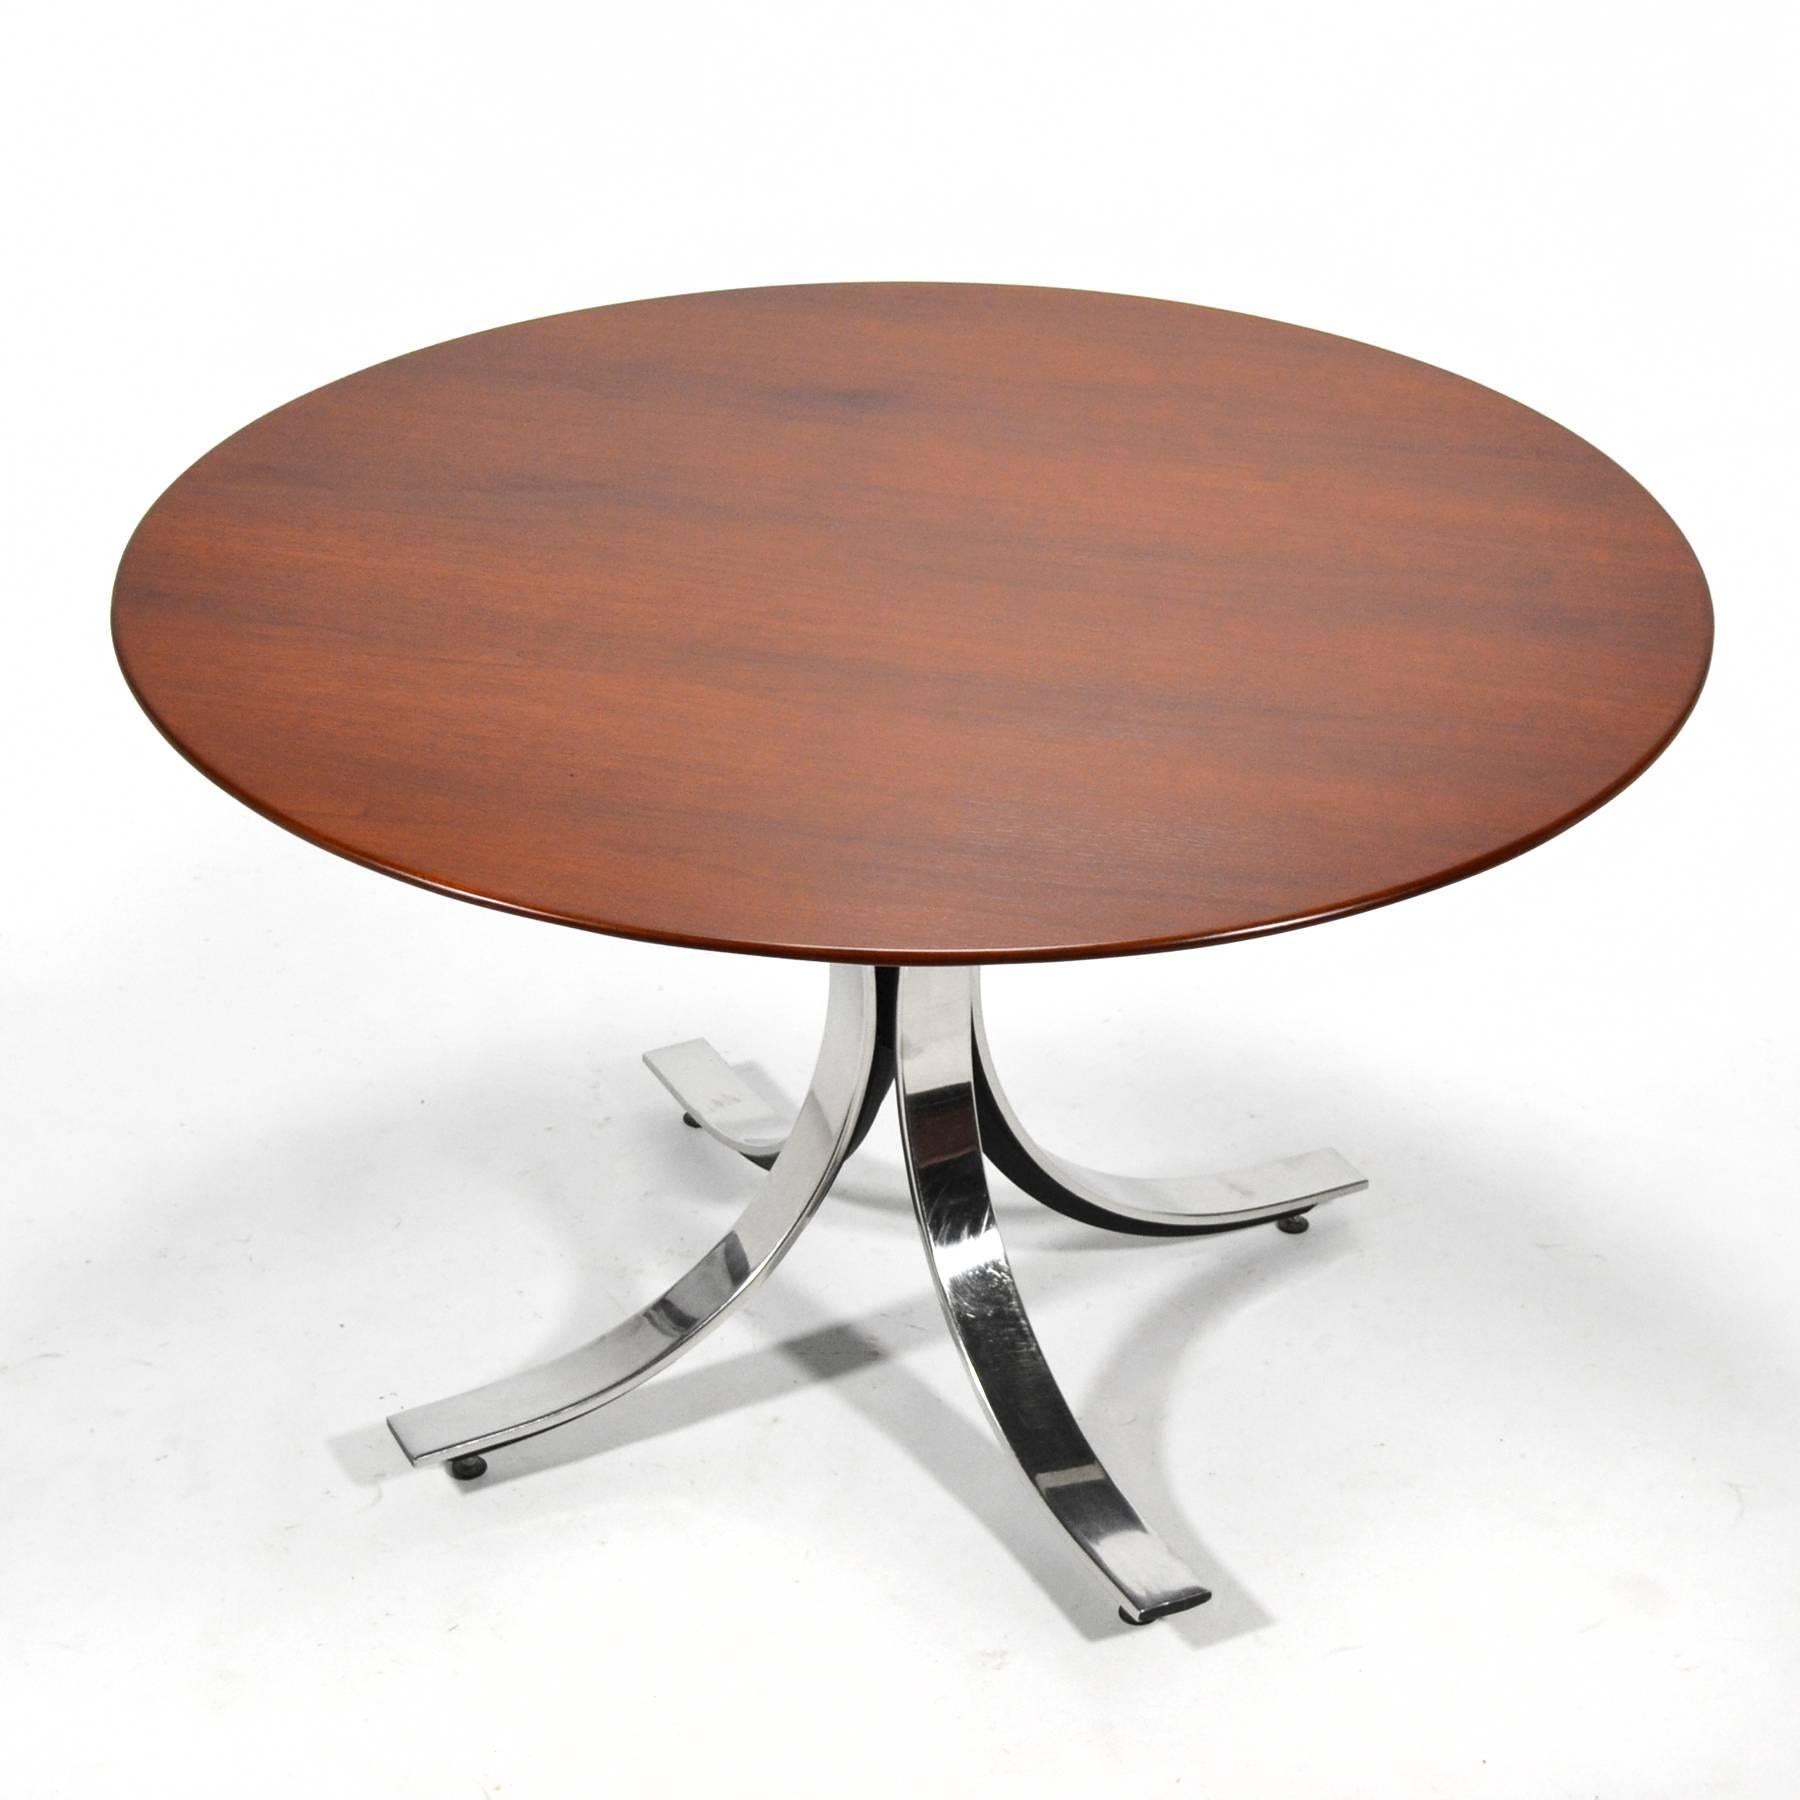 This elegant pedestal table by Borsani has a sexy curved base in chromed and black lacquered steel which supports a walnut top with a beveled edge.